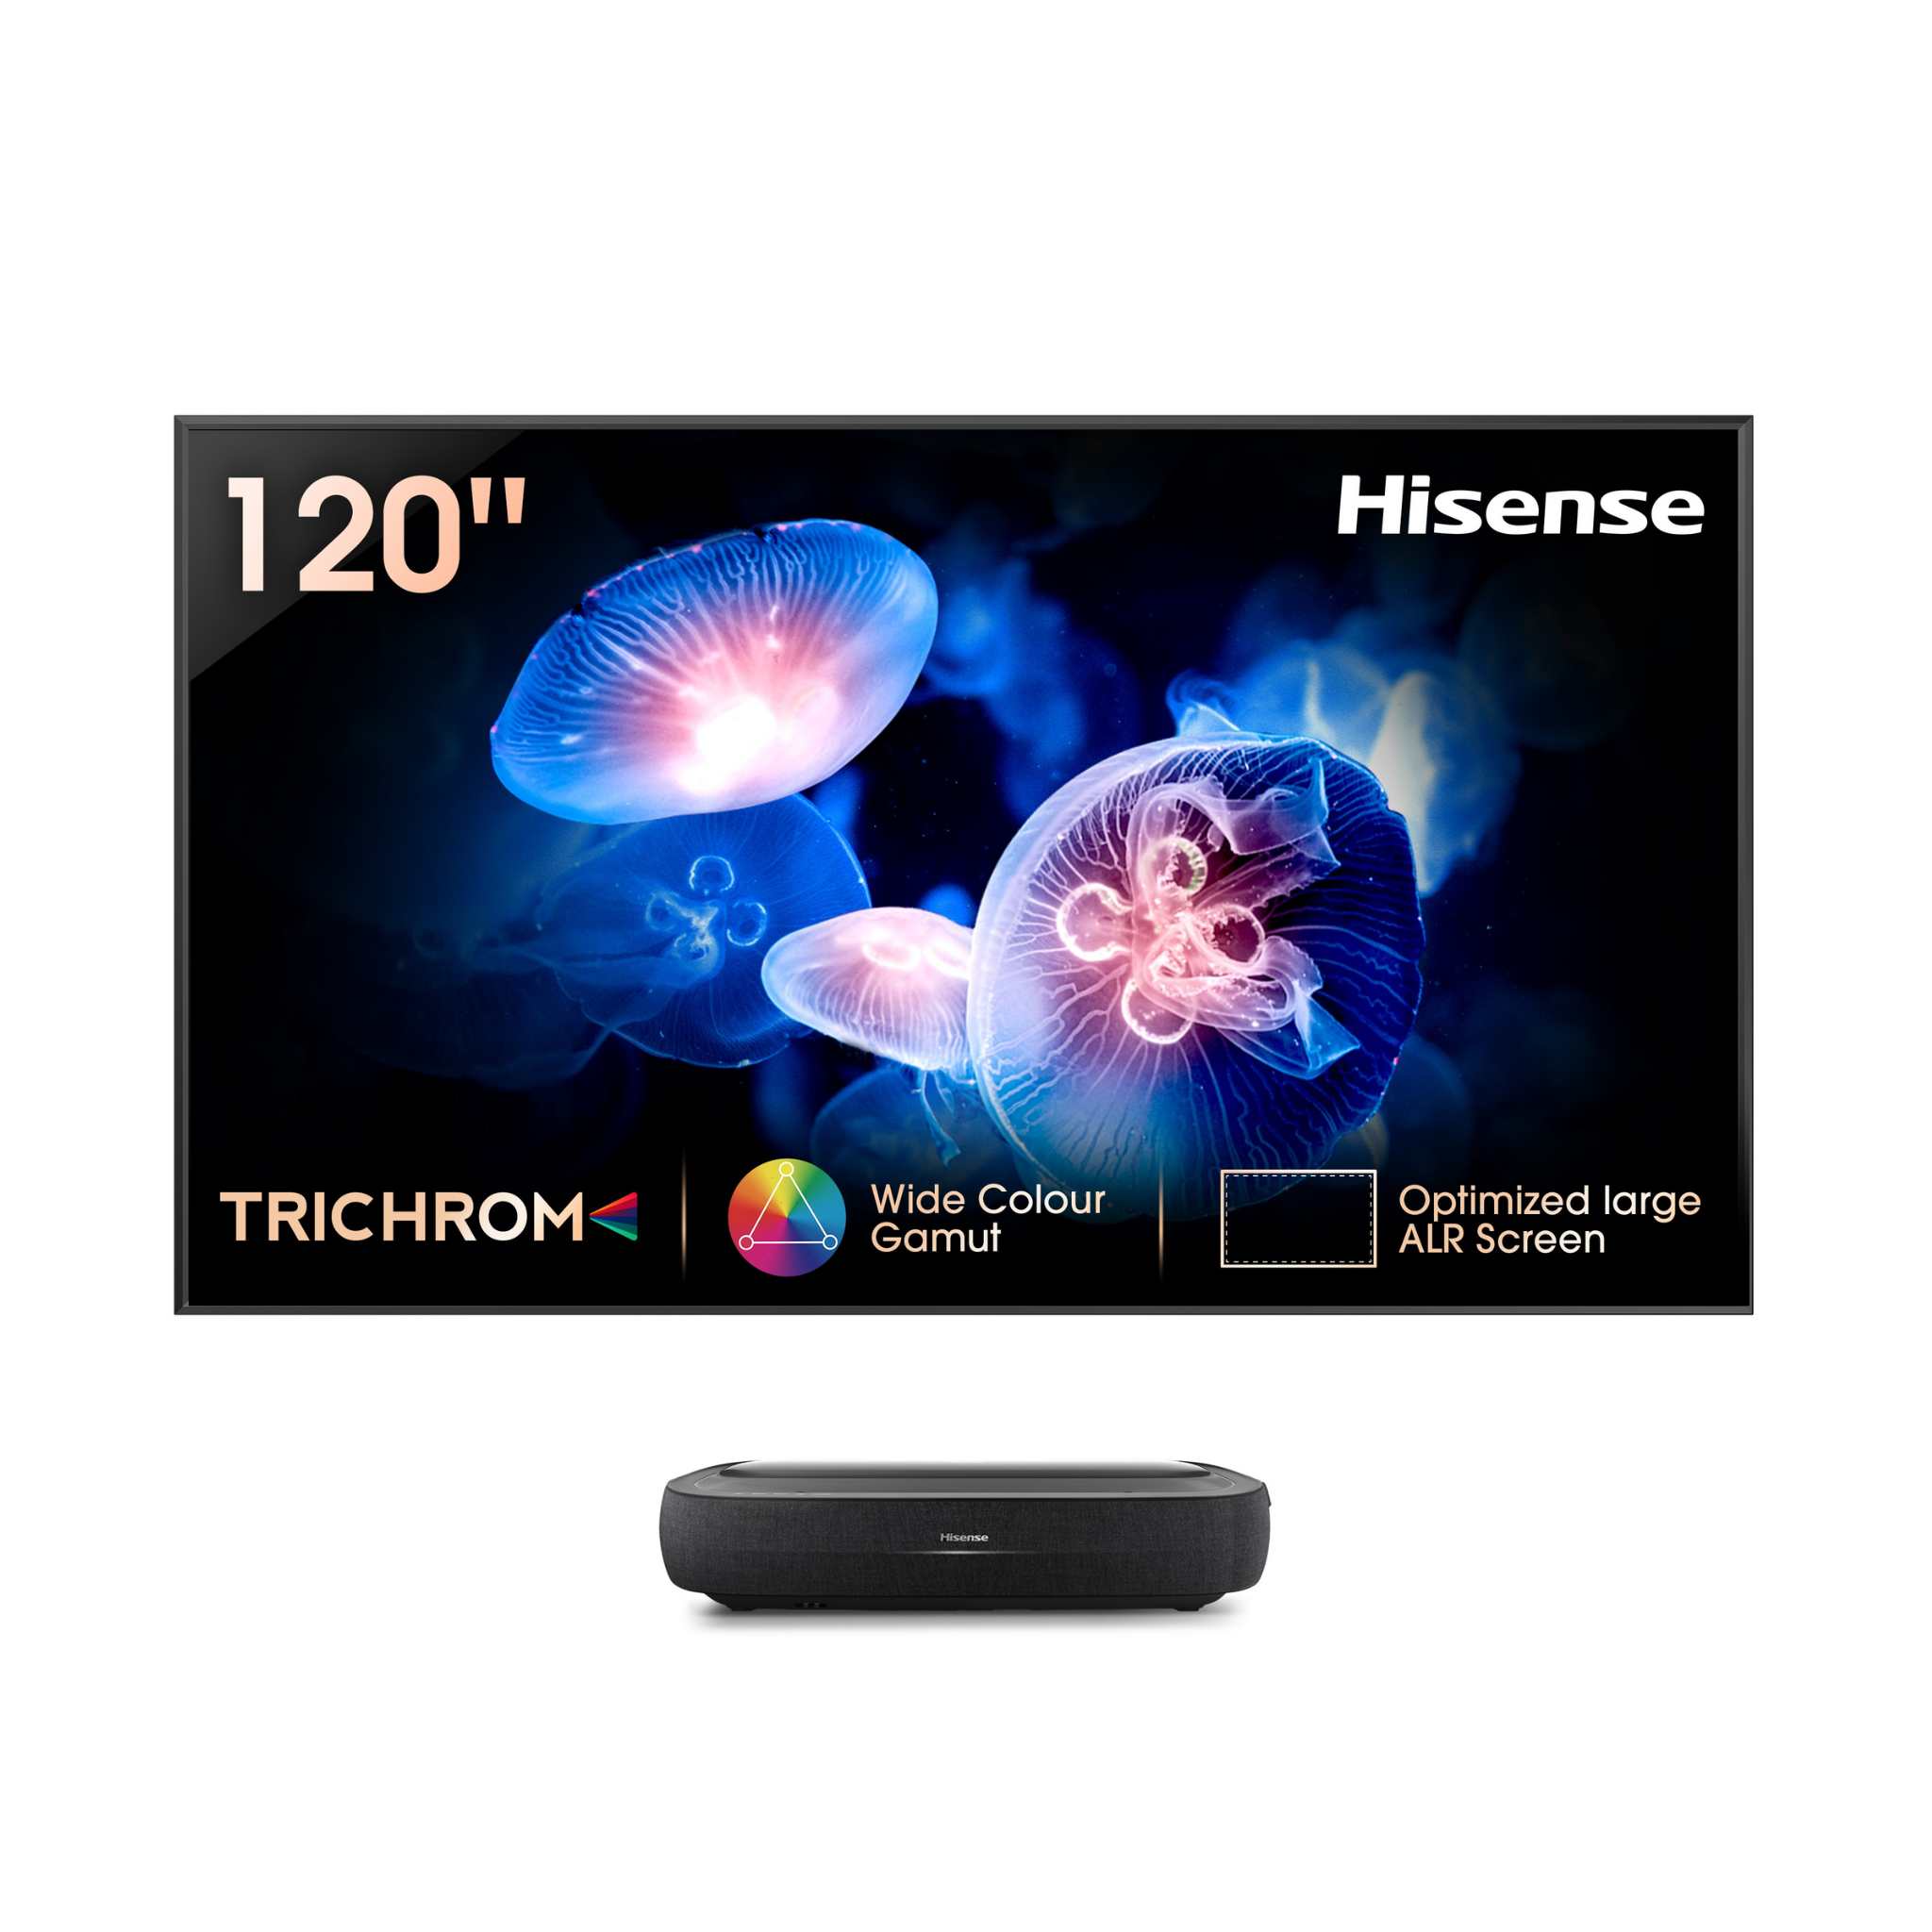 Hisense 120L9HTUKA 120 inch 4K Ultra HD HDR Smart Laser TV with Projector Screen